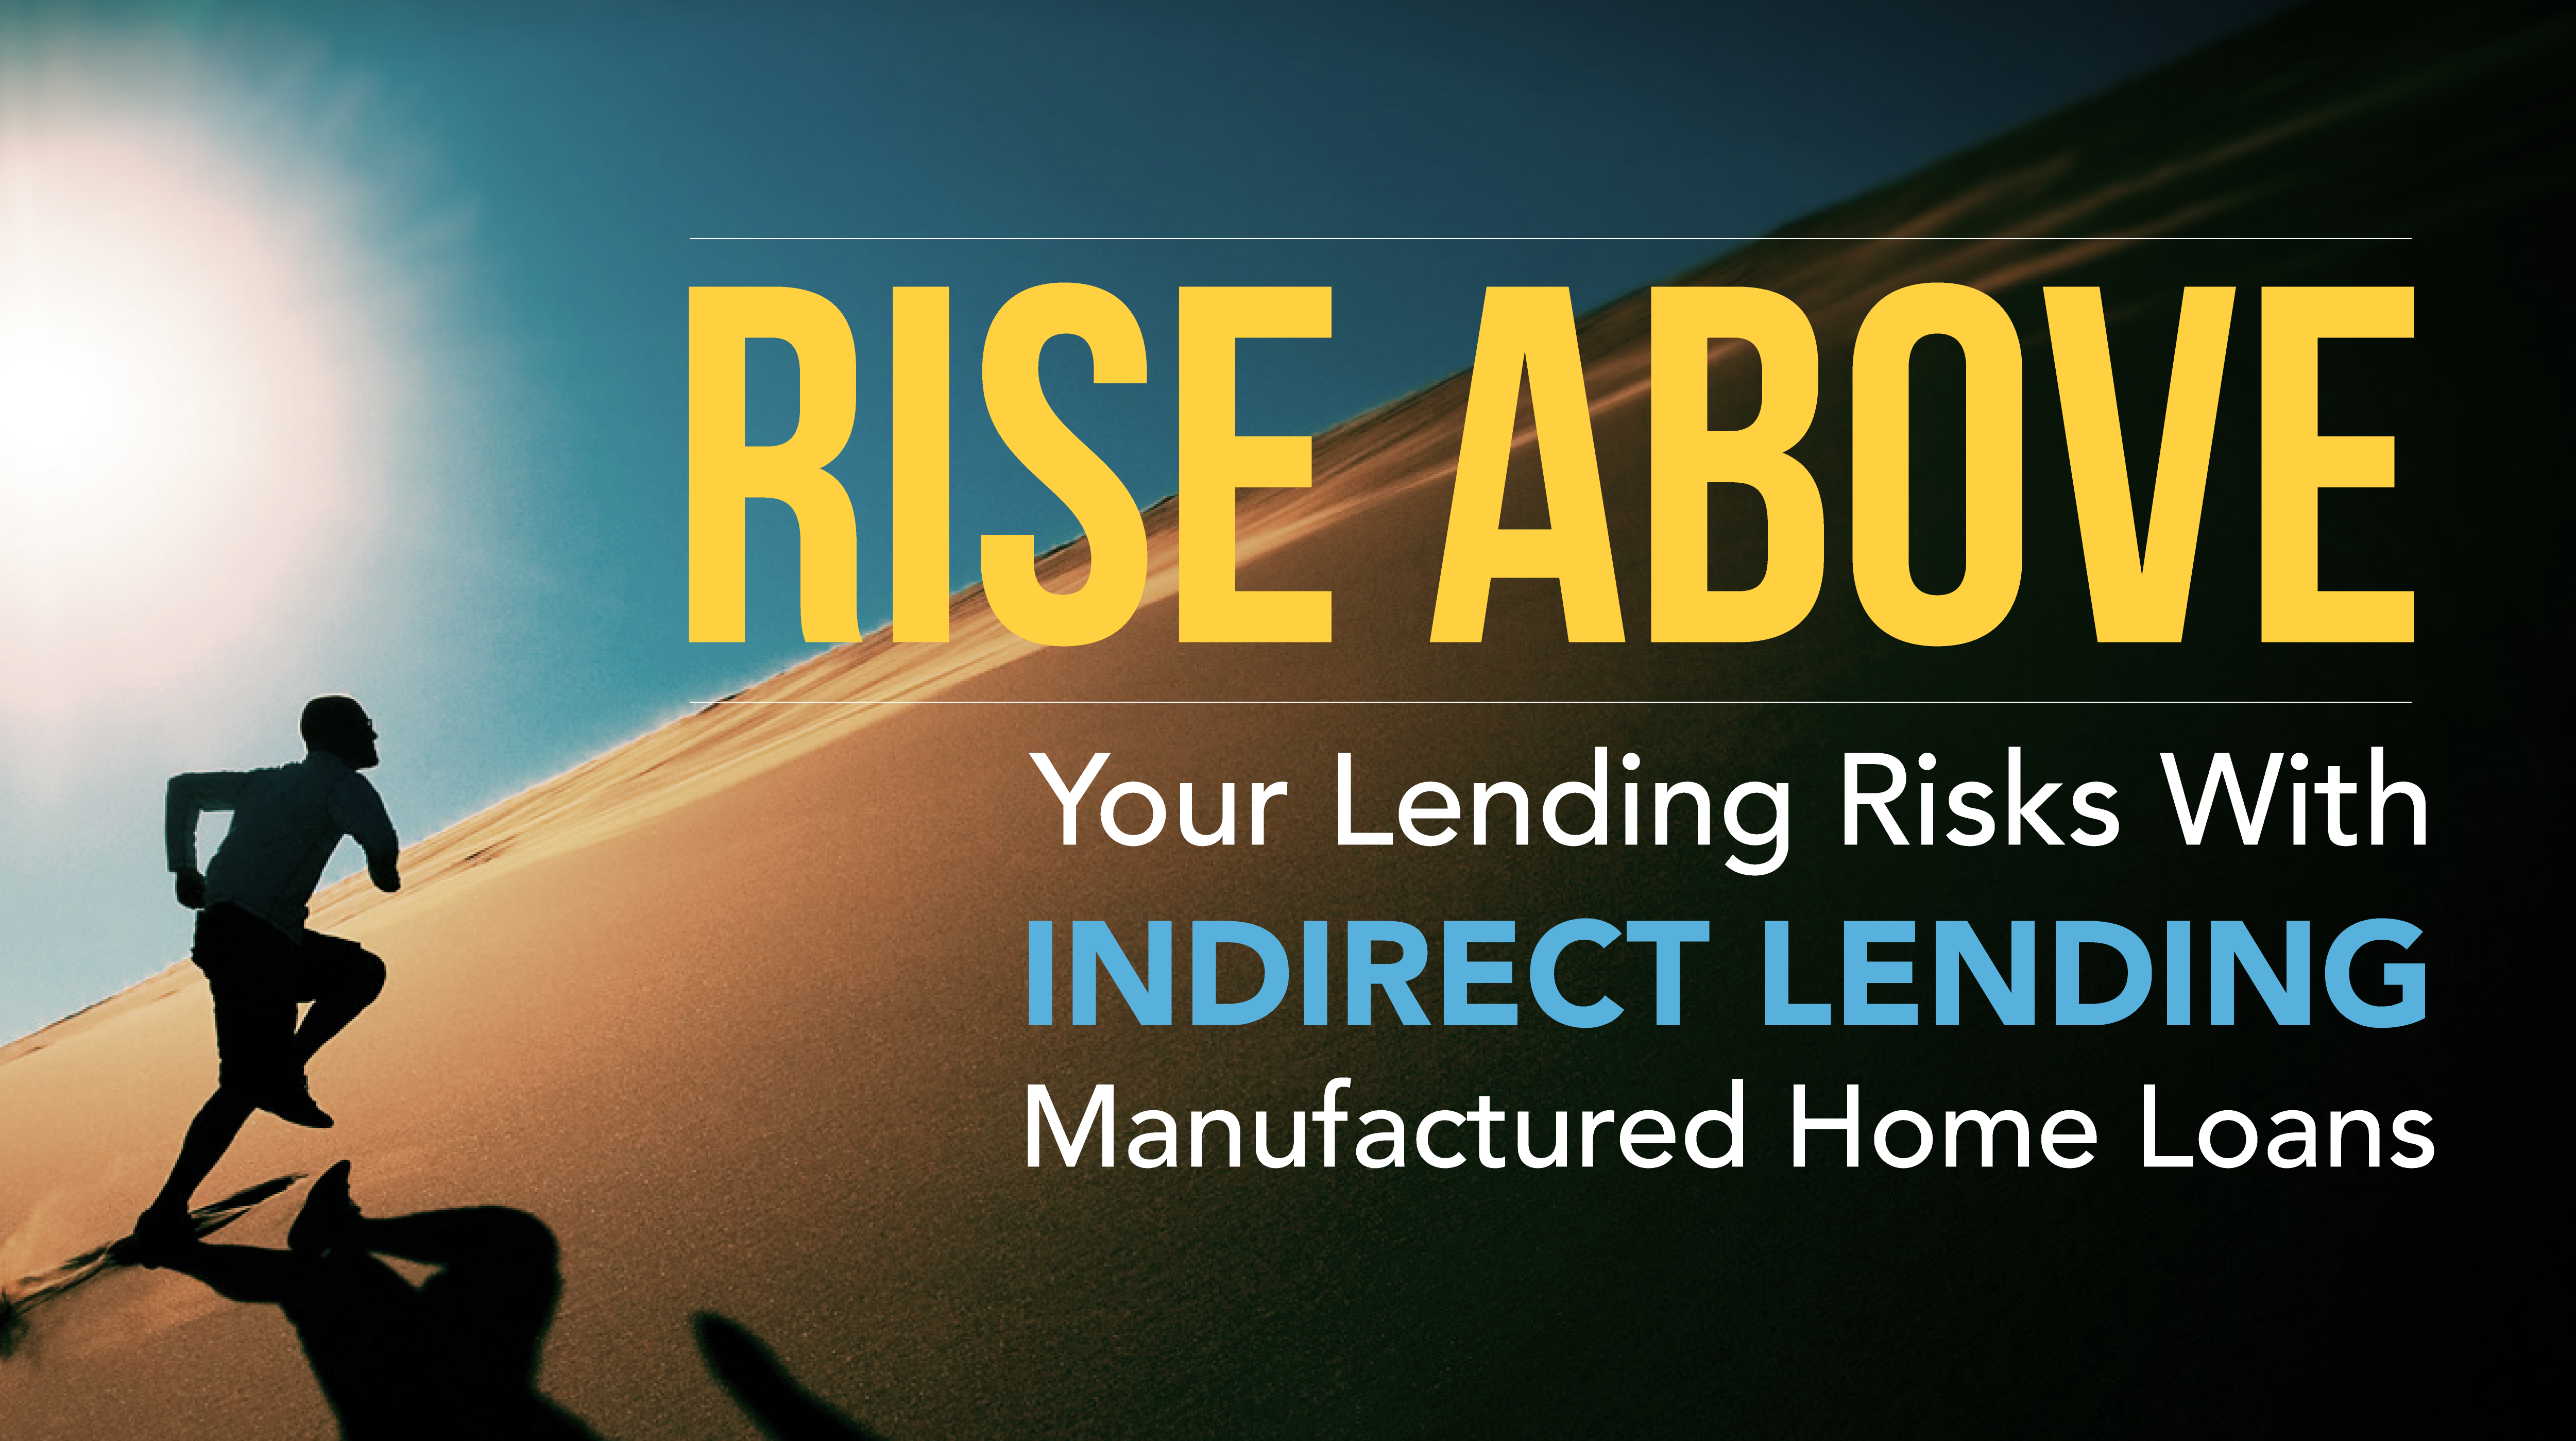 Rise Above Your Lending Risks With Indirect Lending Manufactured Home Loans